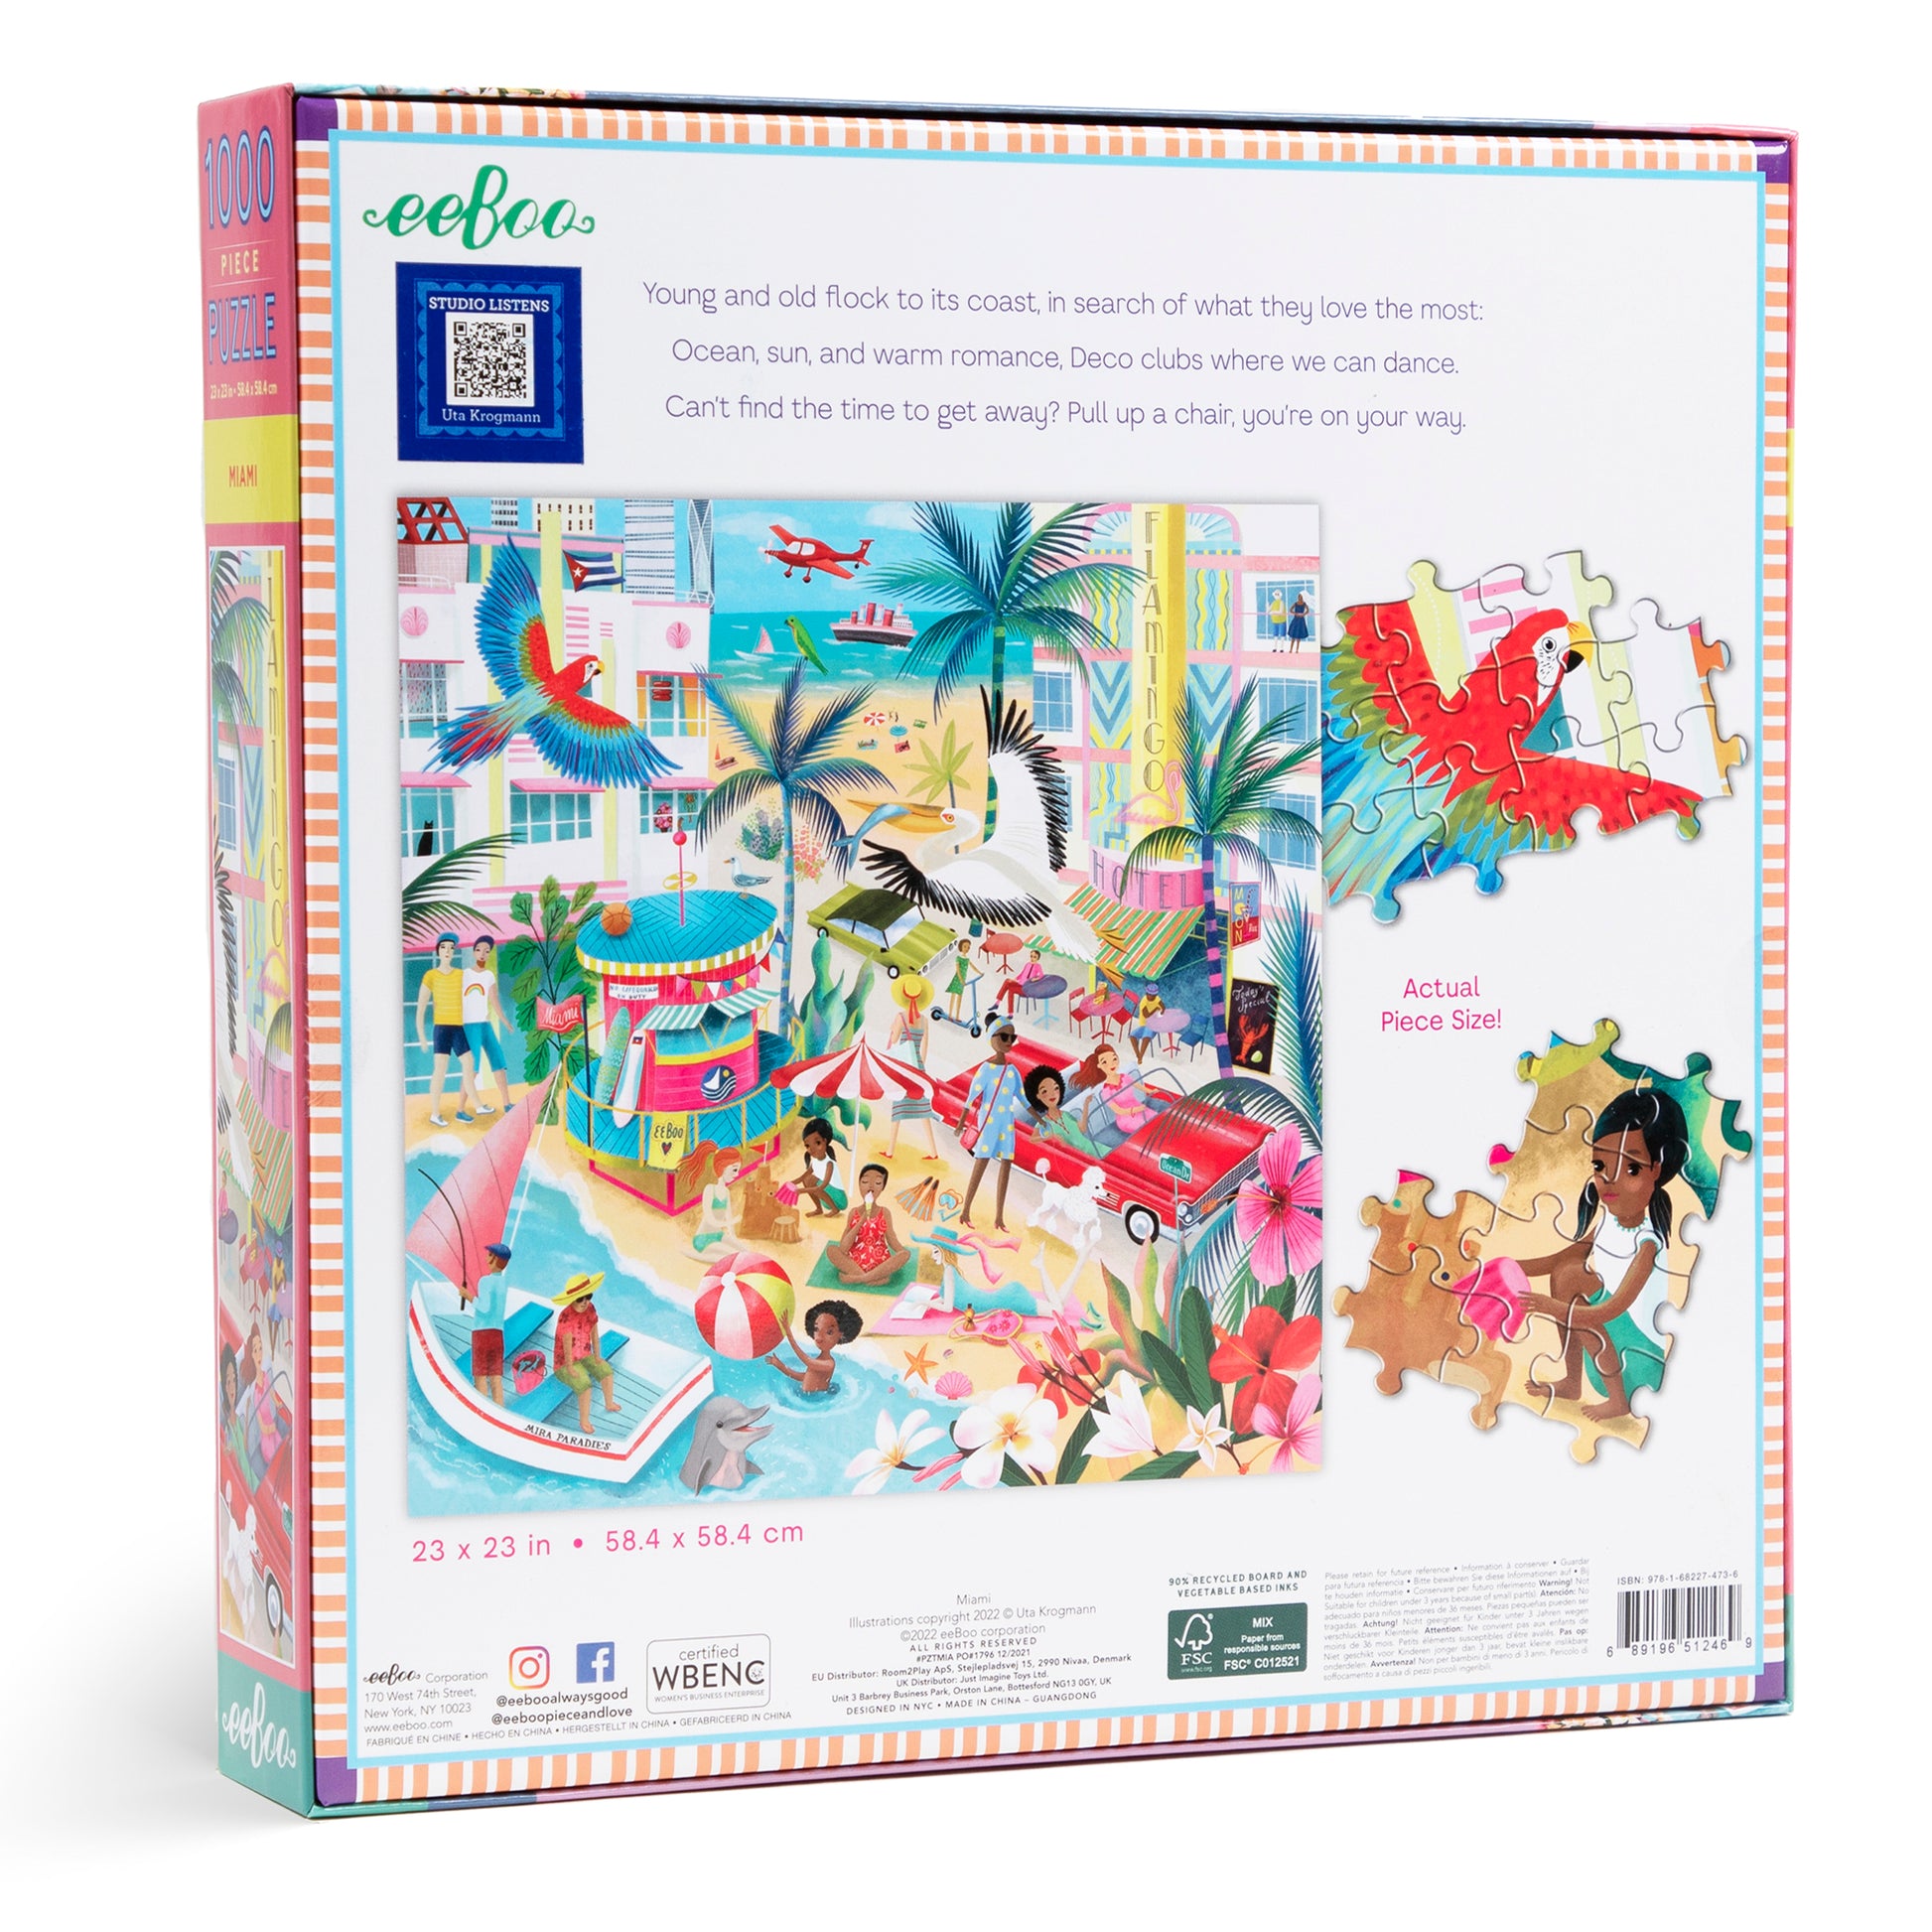 Miami Florida 1000 Piece Travel Jigsaw Puzzle | eeBoo Piece & Love | Gifts for Travel Lovers